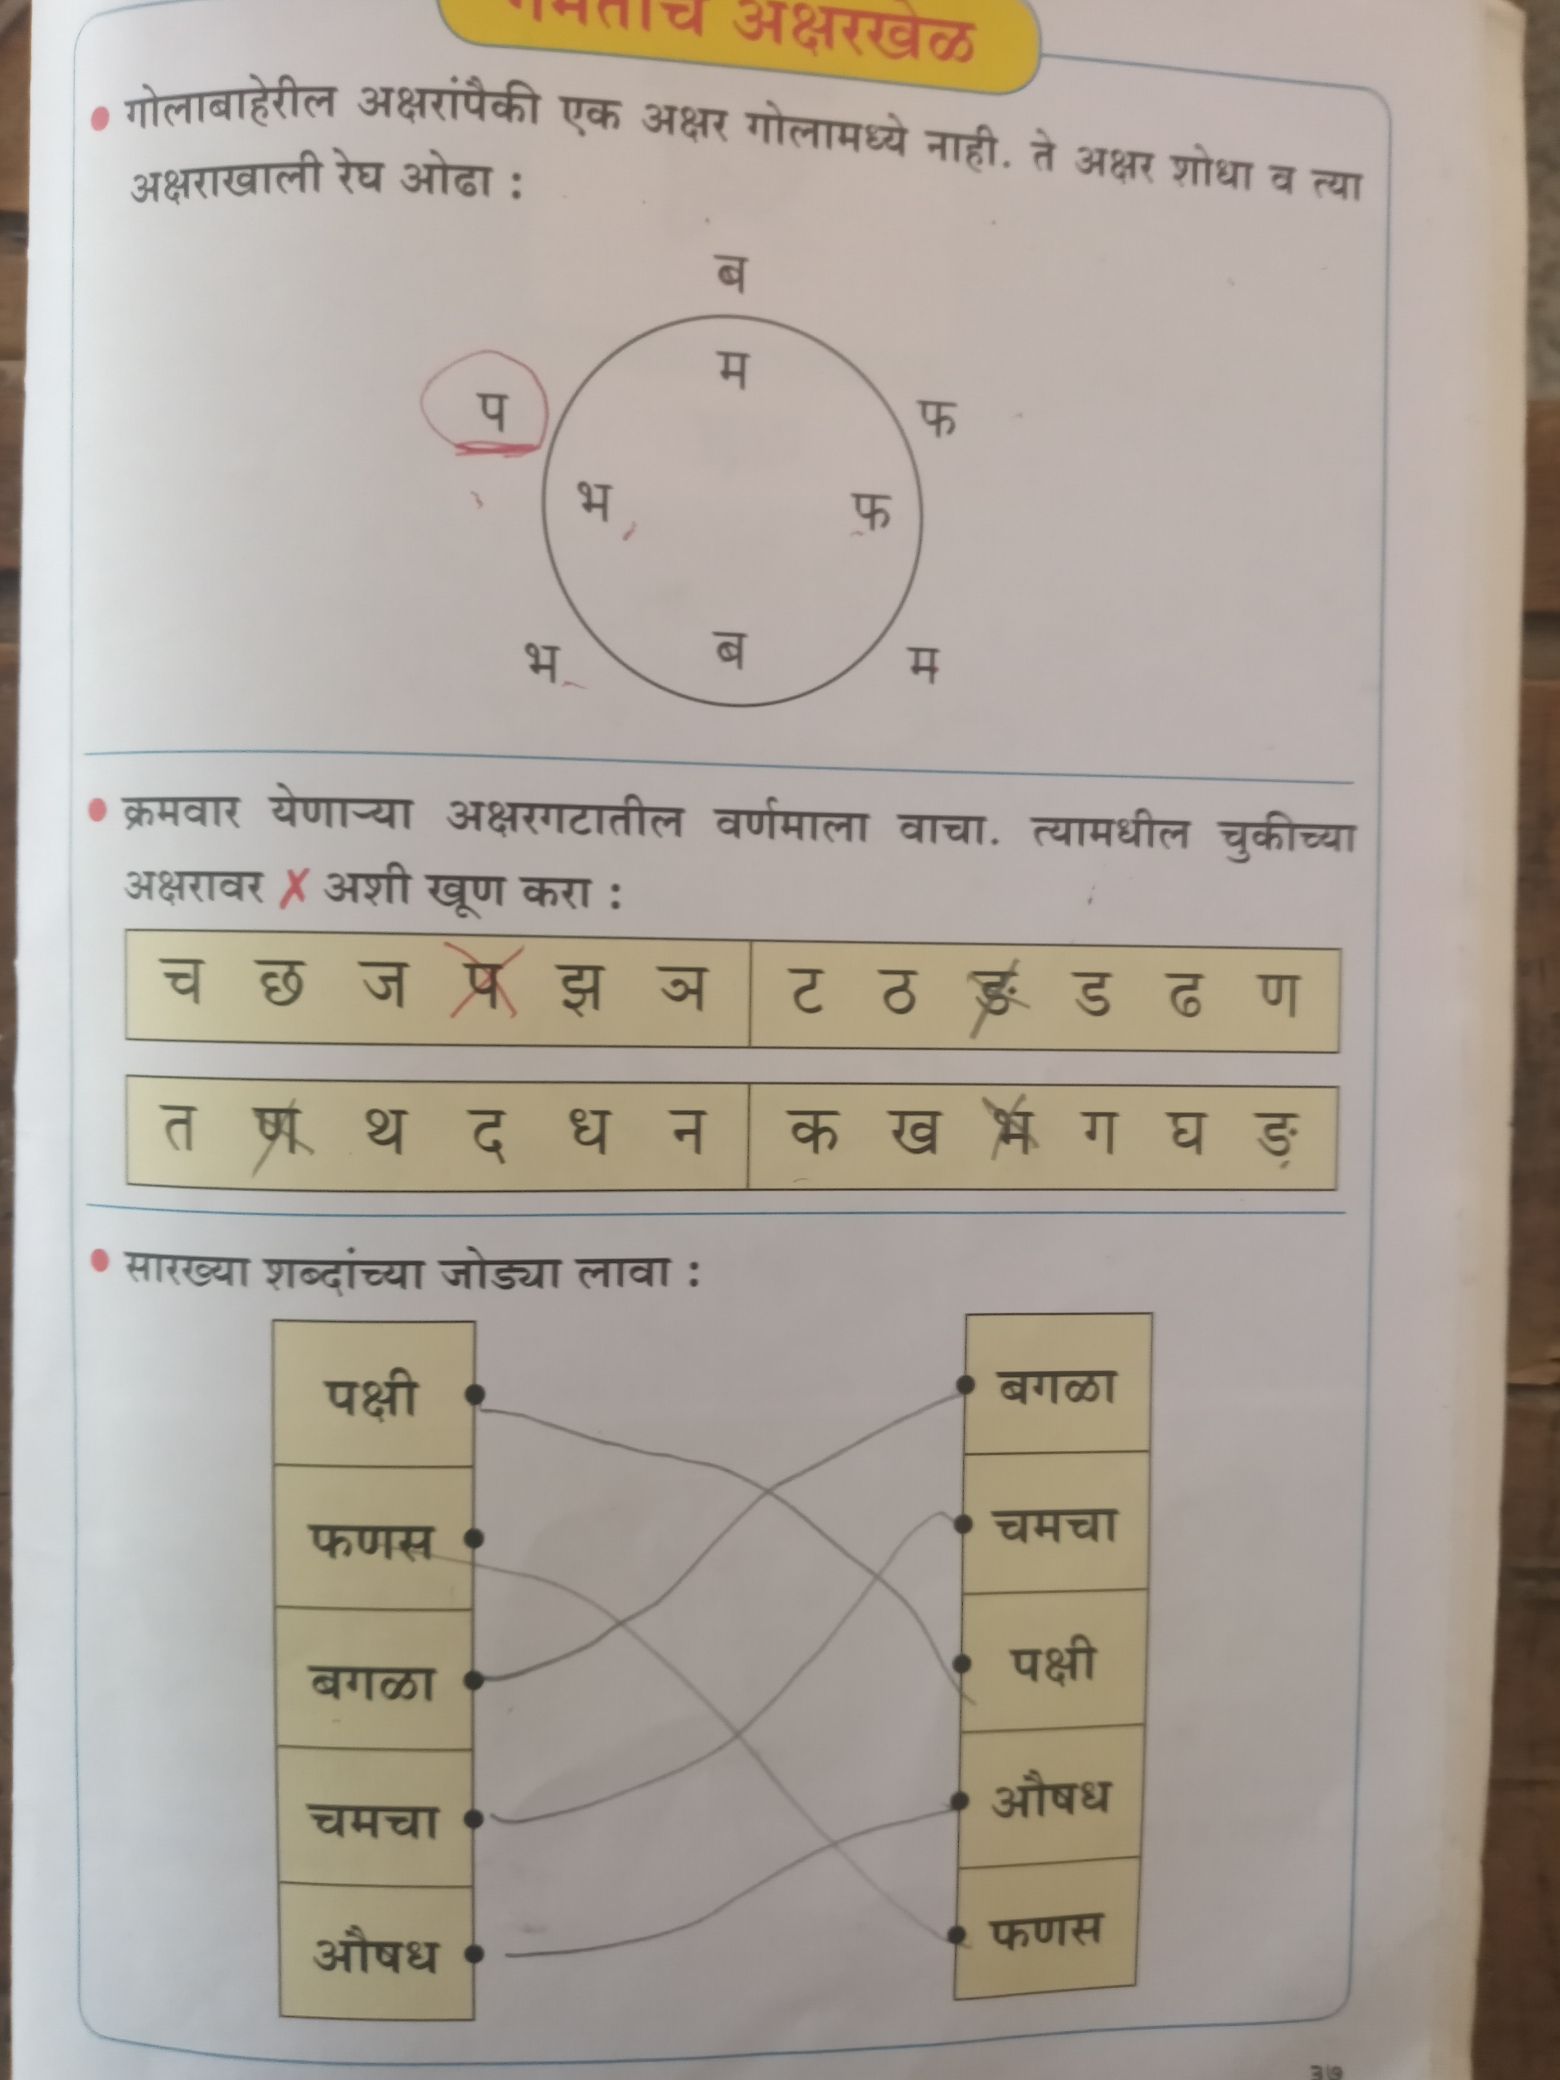 project work and journal assignment in marathi